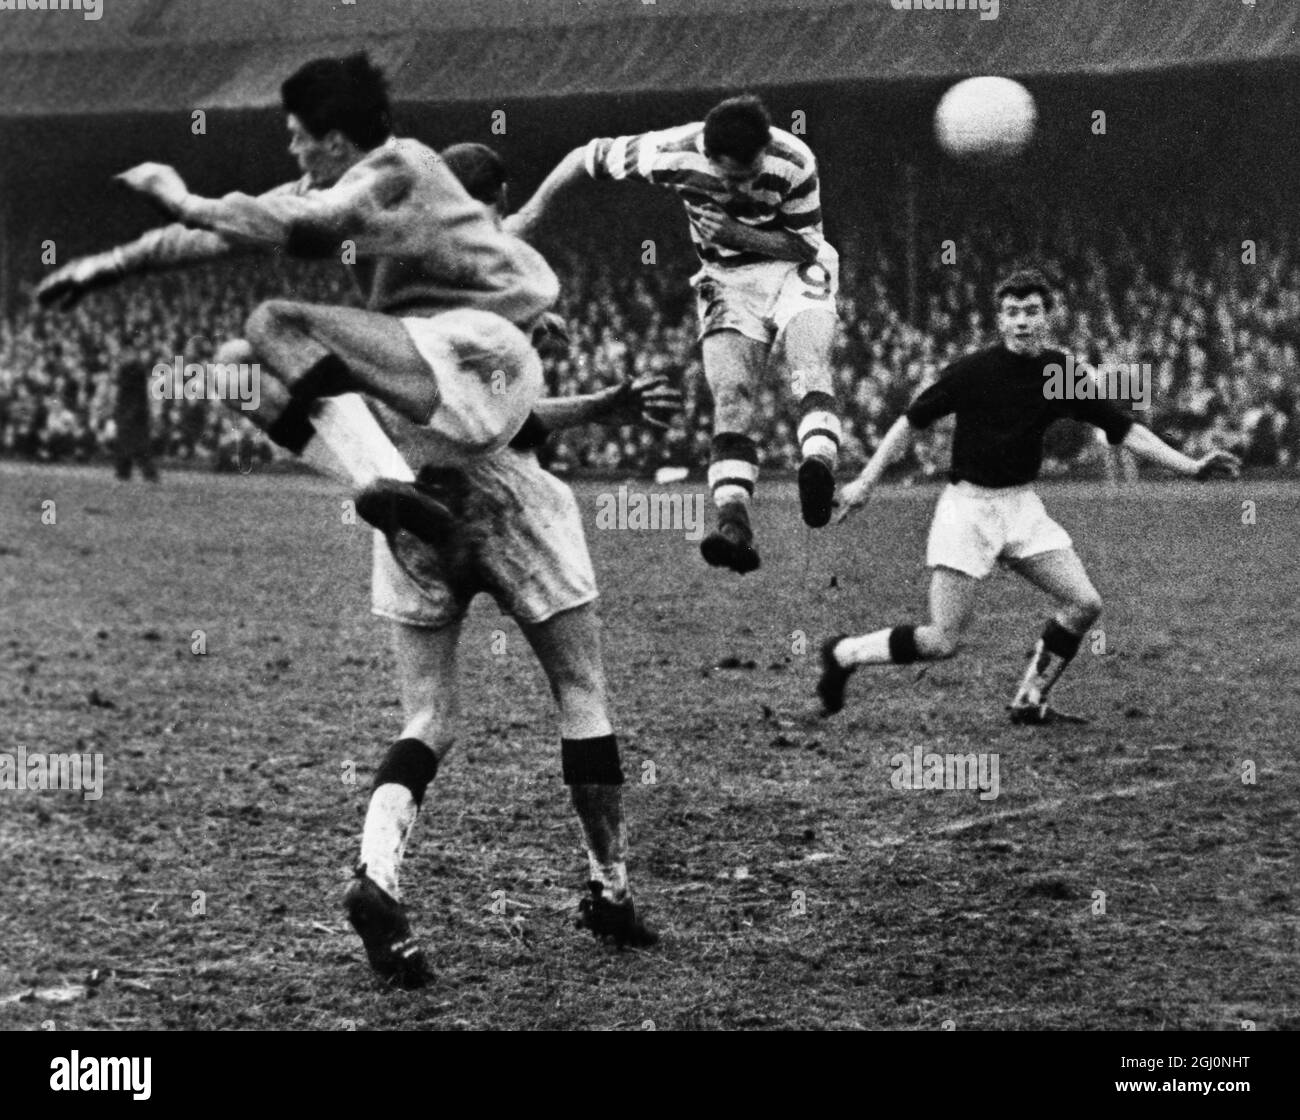 Glasgow ; Chalmers , ( No 9 ) heads in his second goal for Celtic during the Scottish League Division One match against Falkirk . The match resulted in a 7 - 0 victory for Celtic . 6 January 1964 Stock Photo